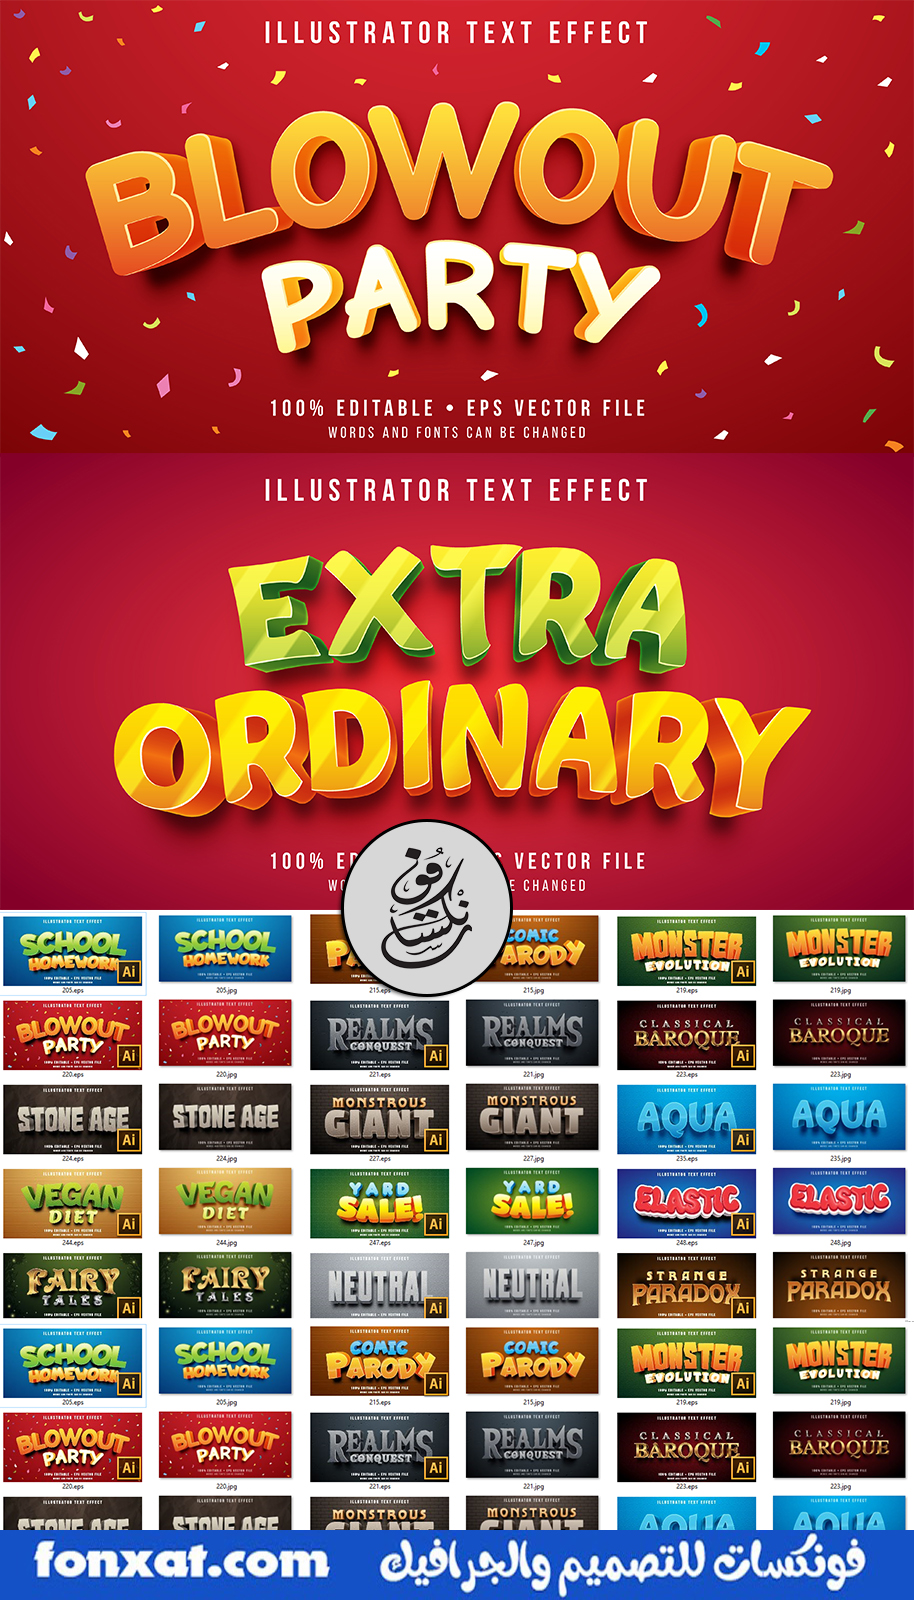 Collection Styles Vector for Illustrator, great professional text effects and styles